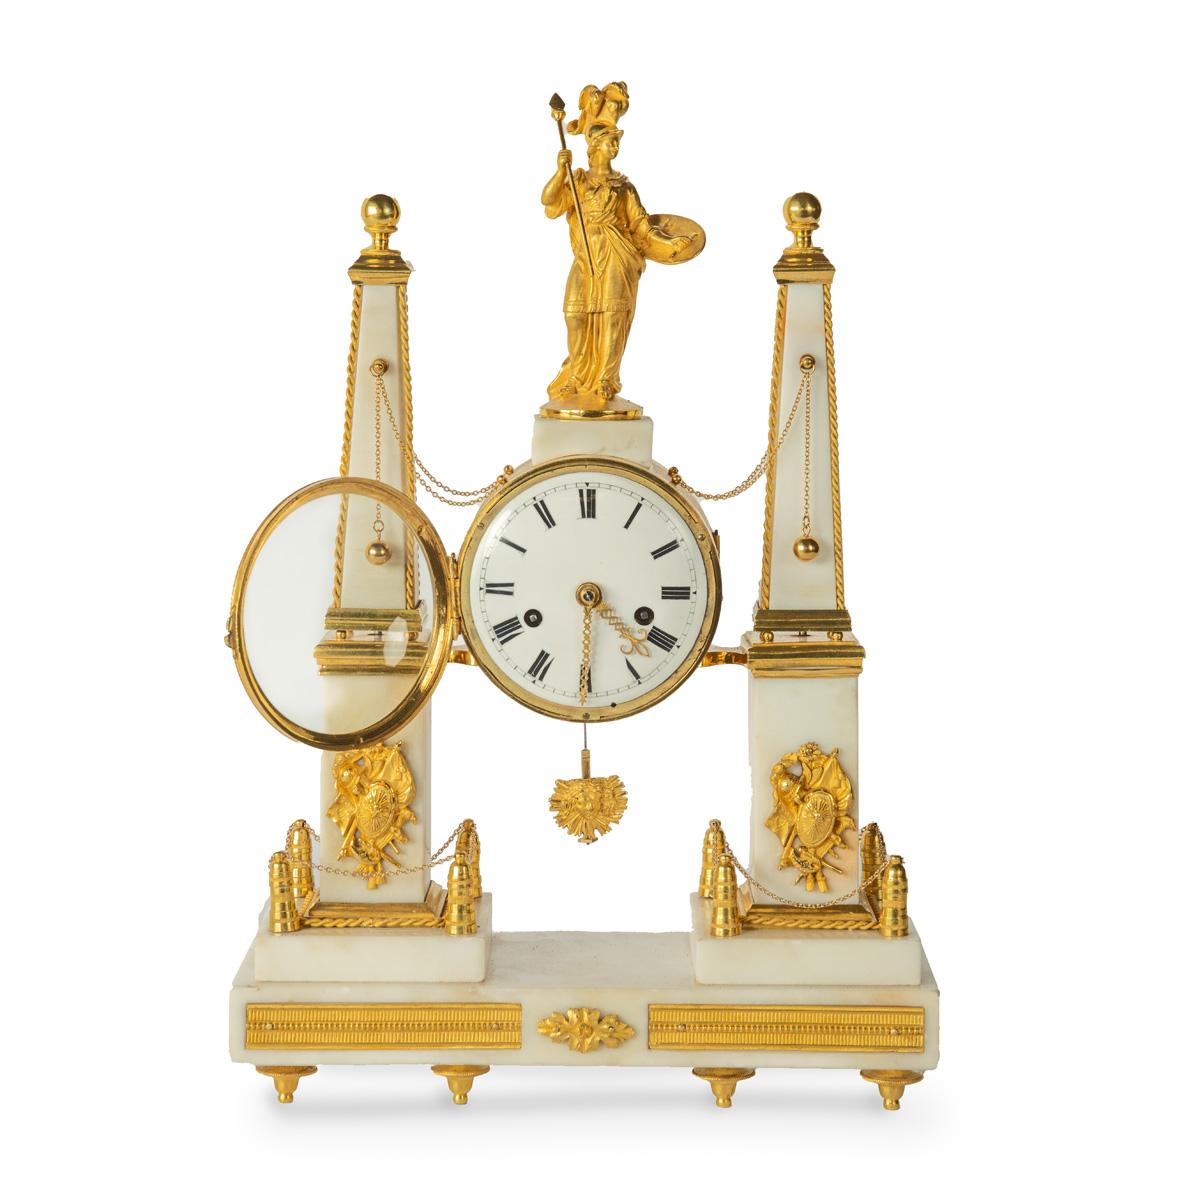 A late Louis XVI marble and ormolu portico clock, comprising a central drum-shaped clock with a sunburst pendulum, surmounted by the gilded figure of Athena wearing armour with a plumed helmet and Gorgon’s head shield, suspended between two obelisks